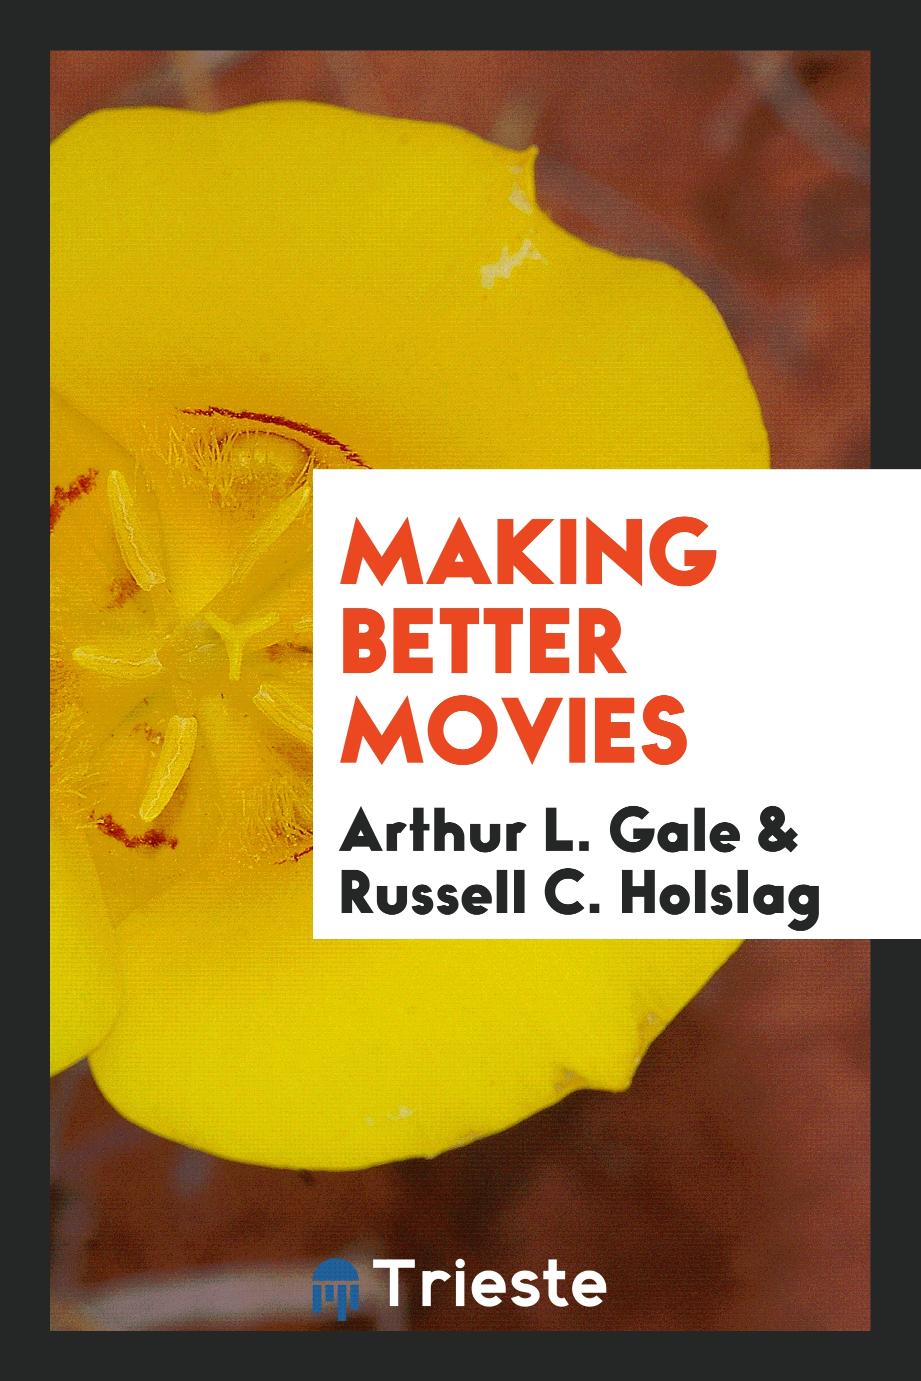 Making better movies